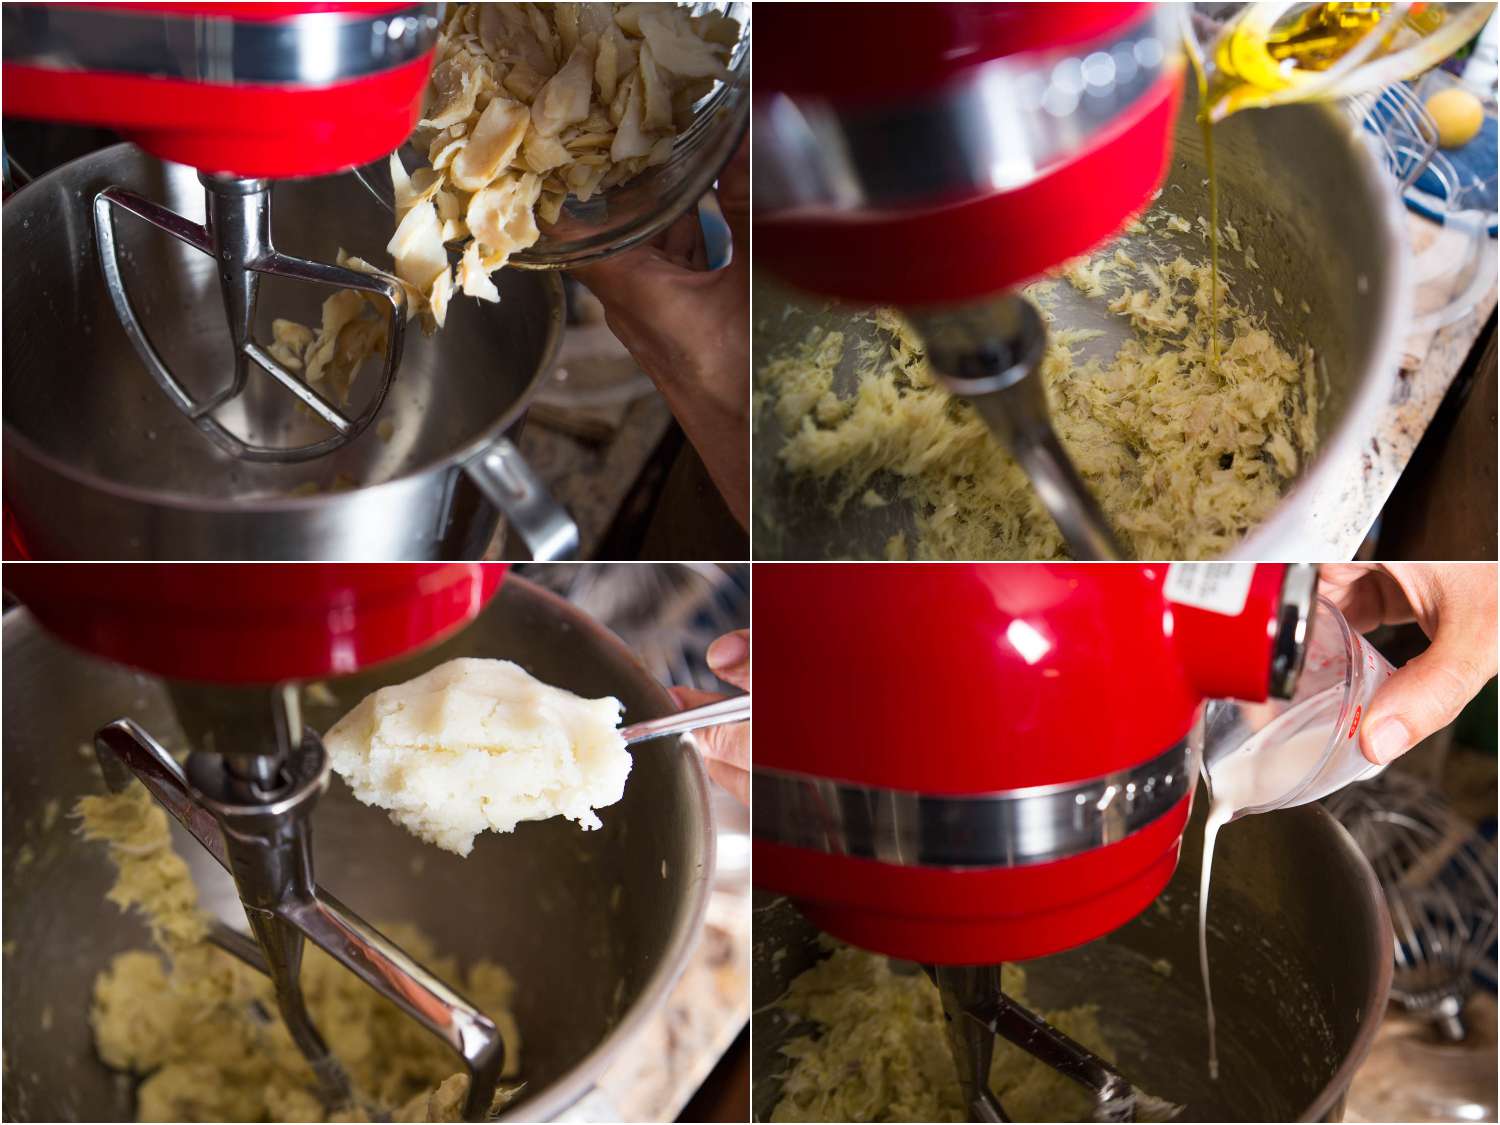 A collage showing the salt cod, oil, garlic, and half-and-half being added to the bowl of a red stand mixer.